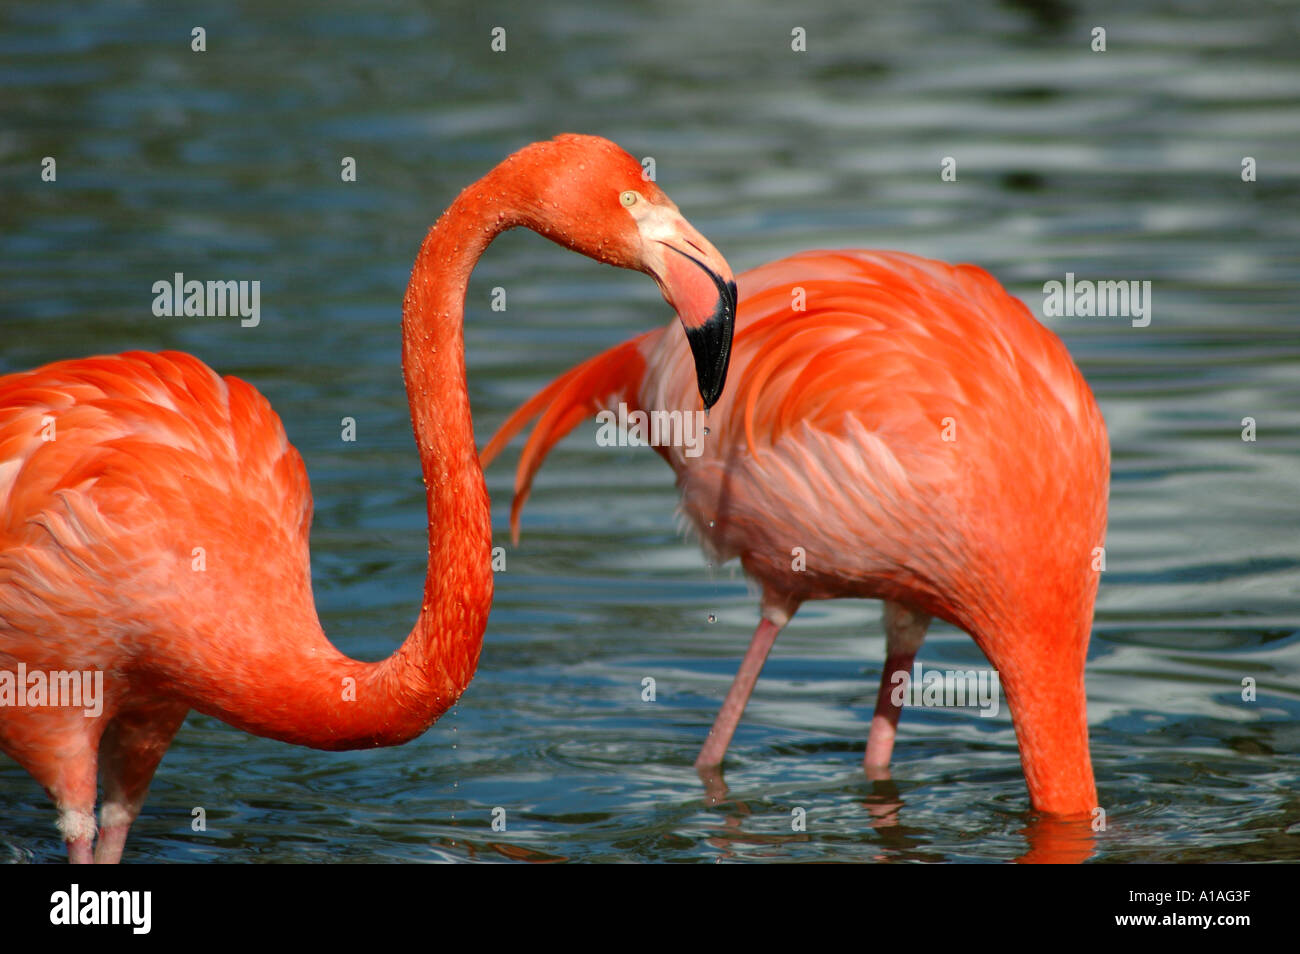 Two Flamingos in water Stock Photo